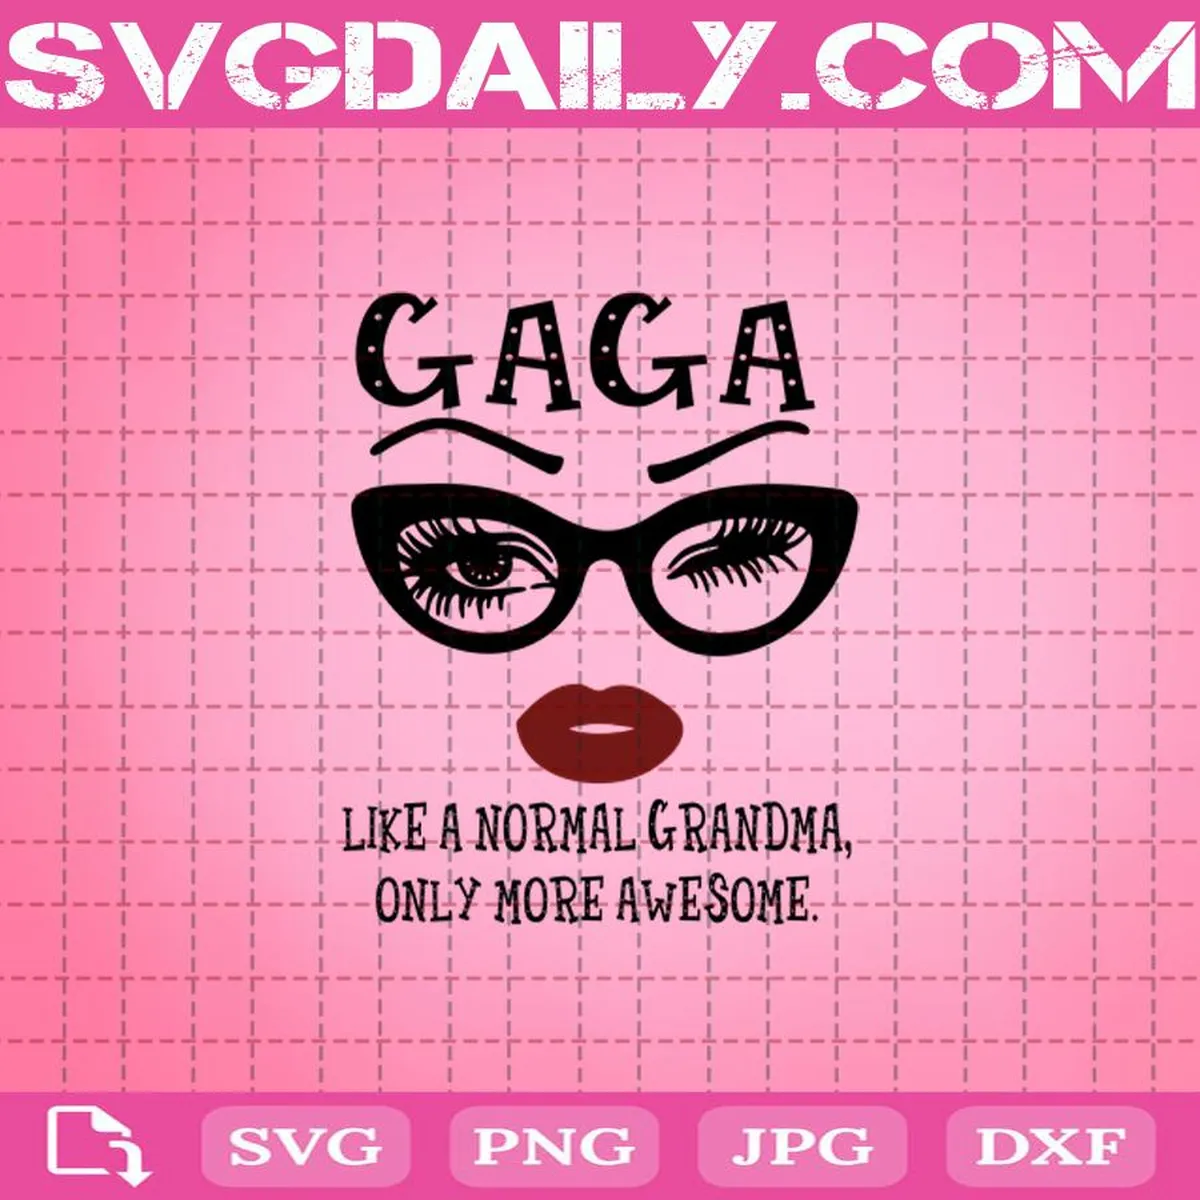 Gaga Like A Normal Grandma, Only More Awesome Svg, Gaga Svg, Awesome Glasses Face Svg, Awesome Eyes Lip Svg